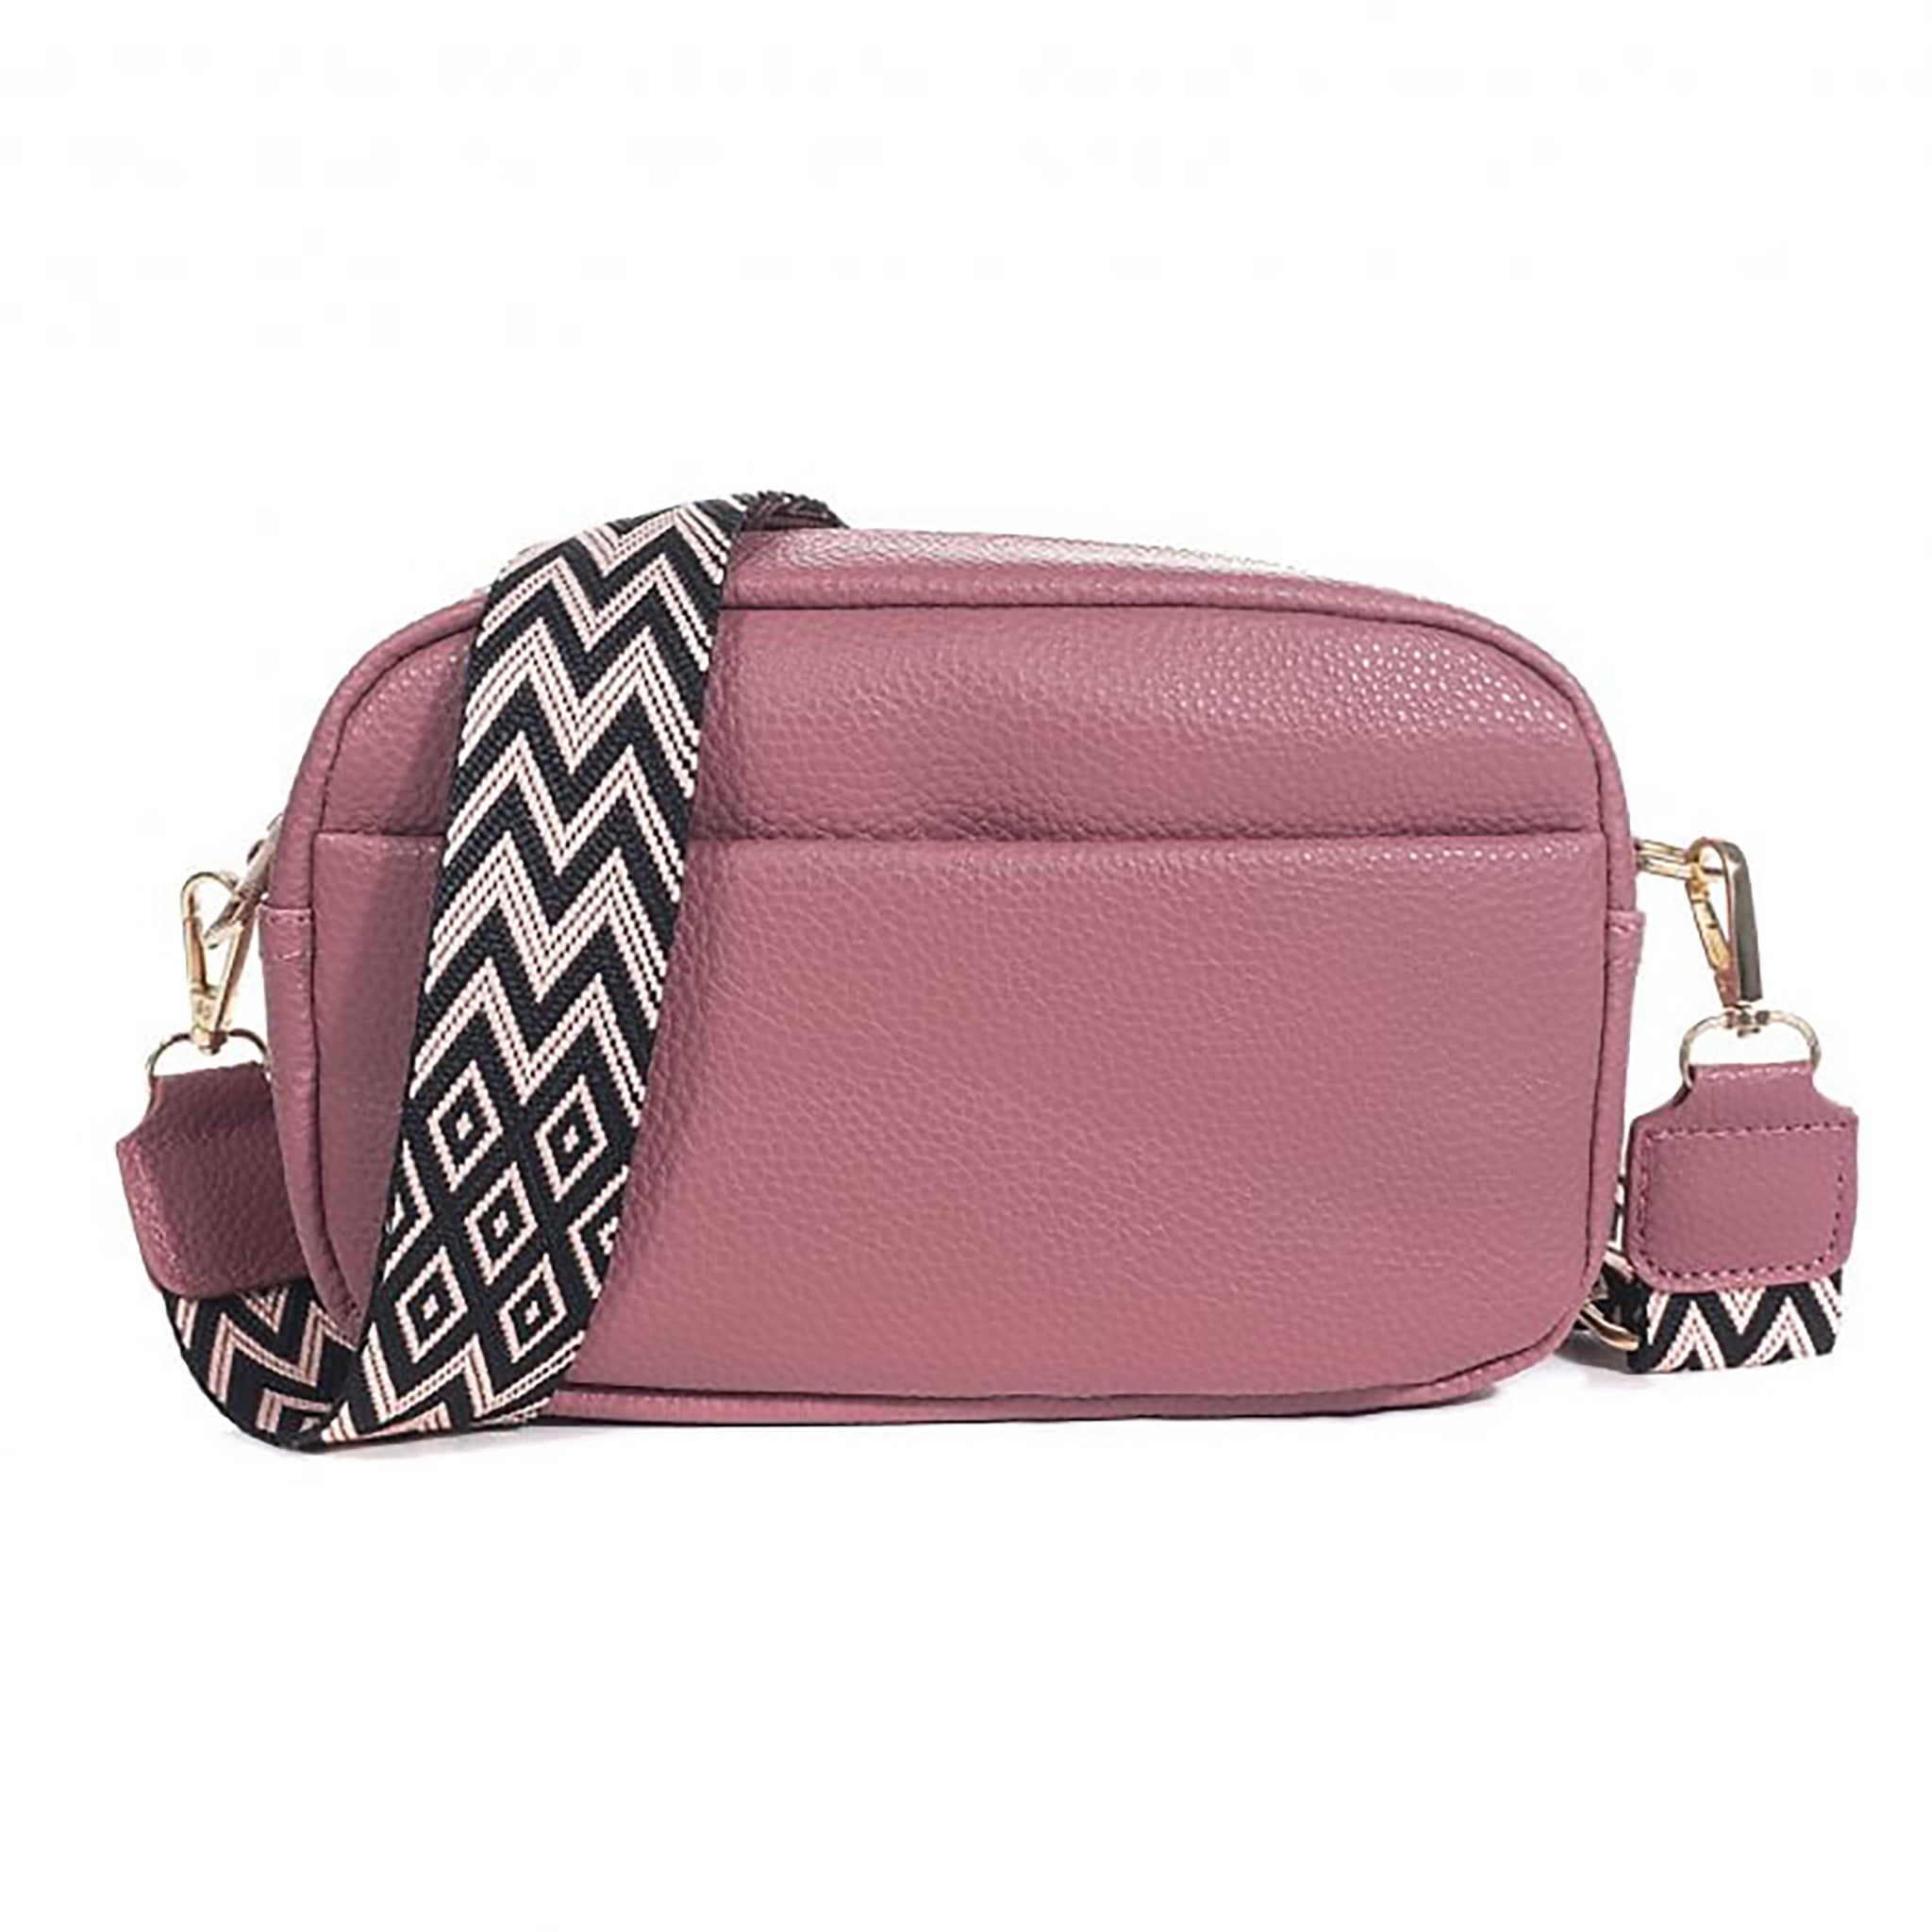 Pink rose camera bag with woven strap featuring a western style design in black and pink